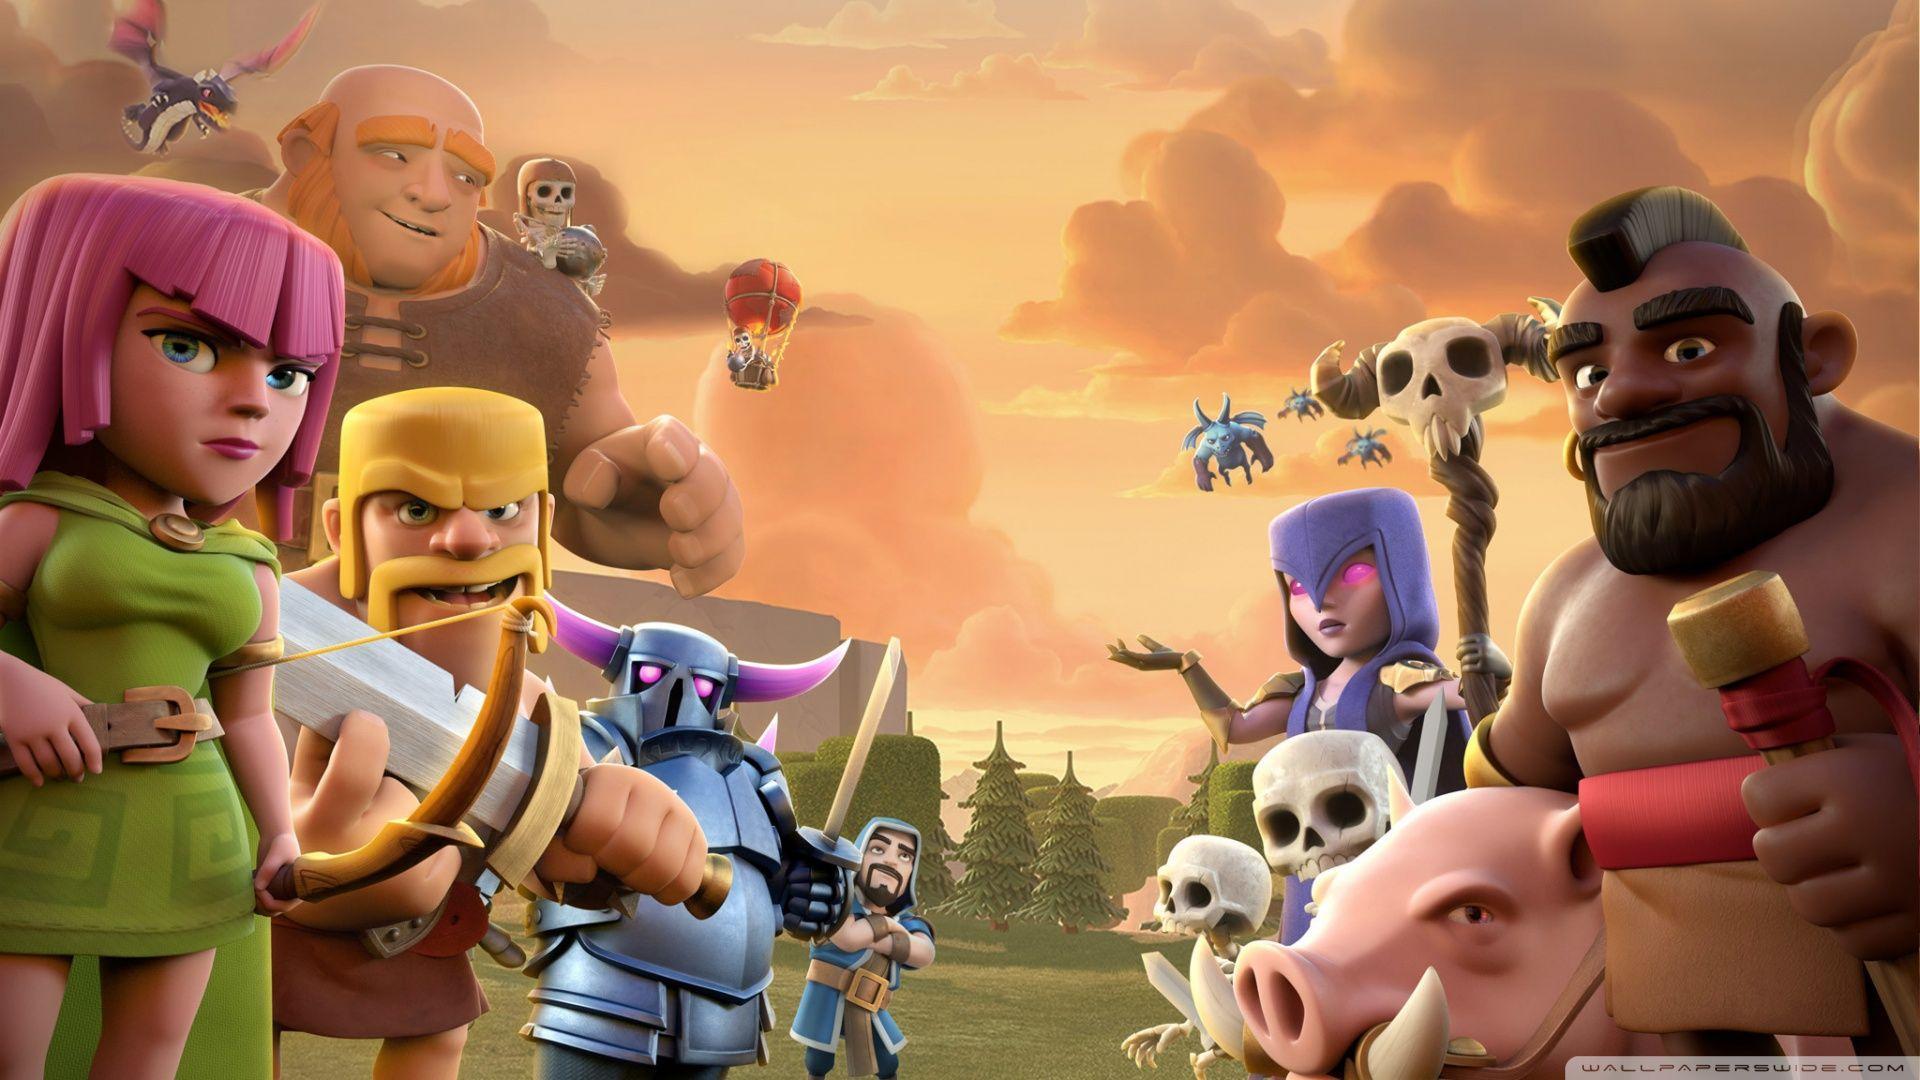 Clash Of Clans HD desktop wallpapers : High Definition : Mobile.